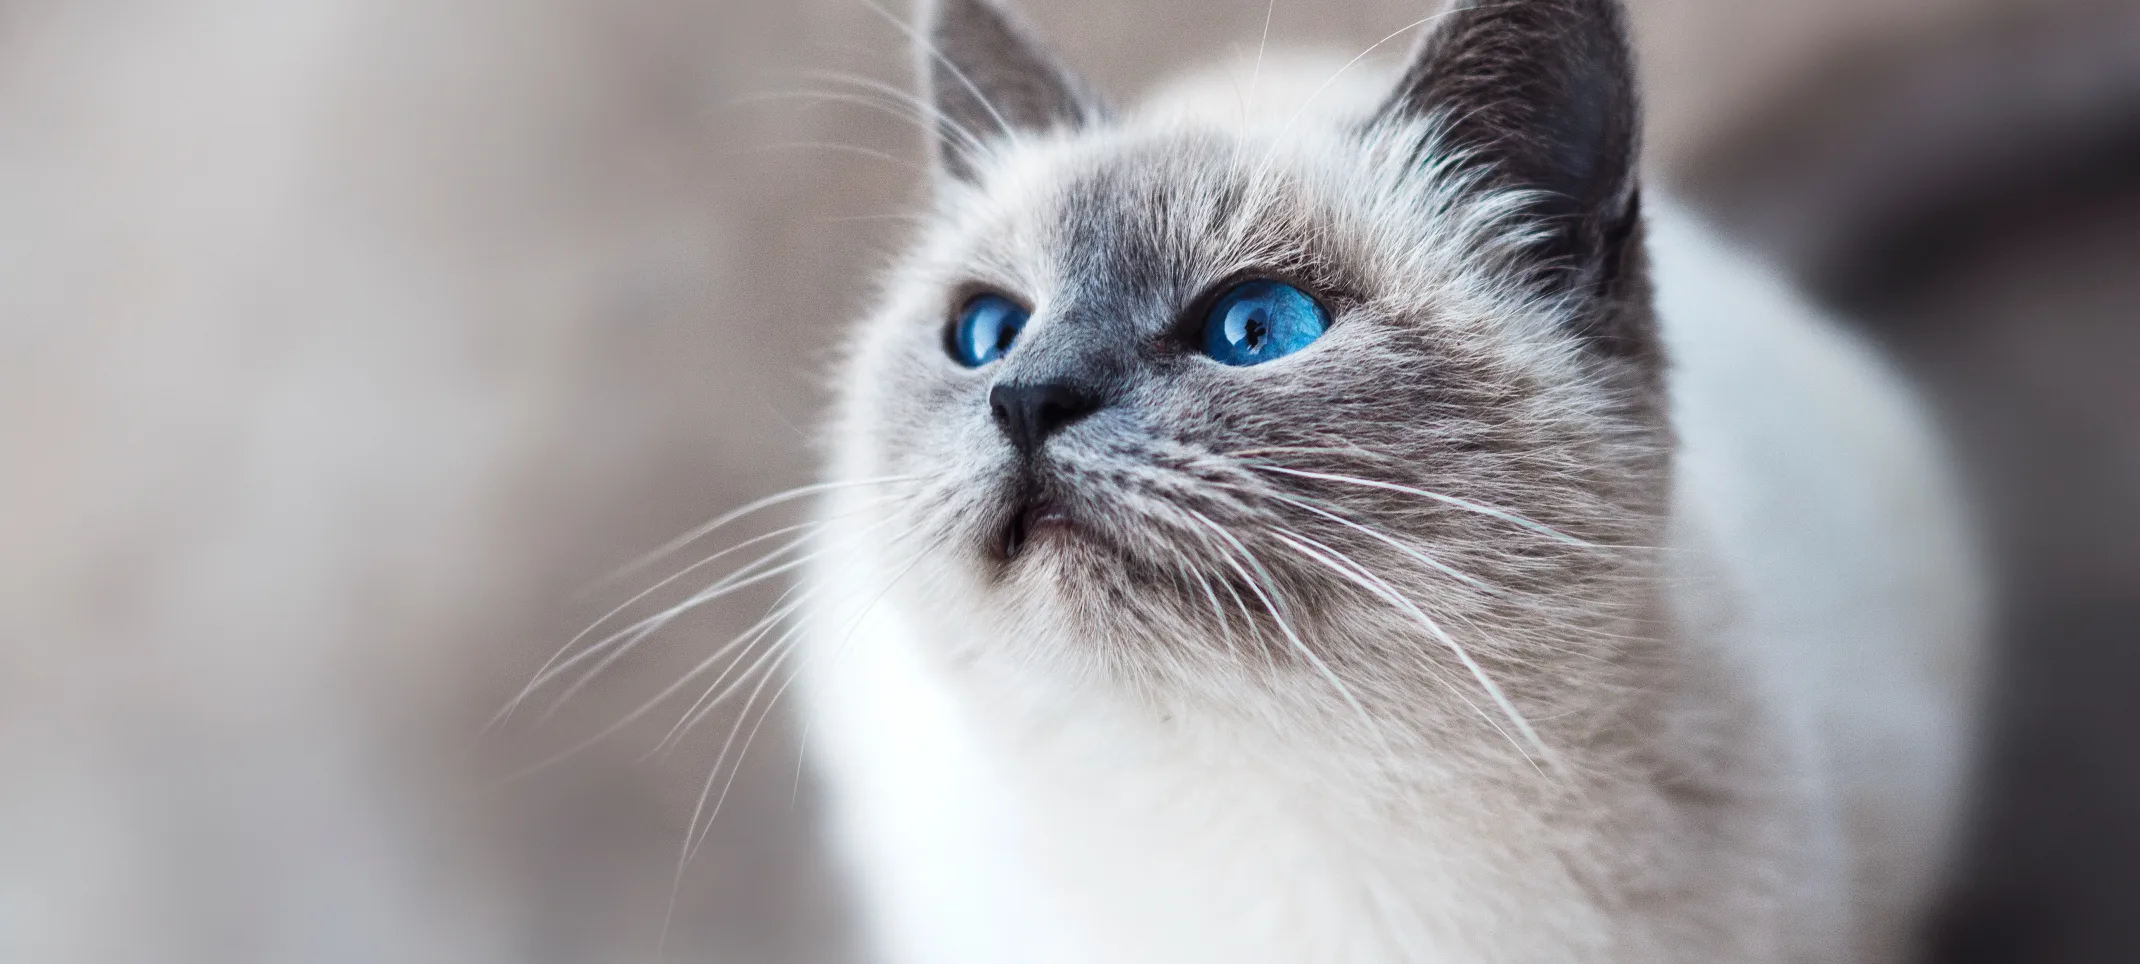 Cat with bright blue eyes looking up